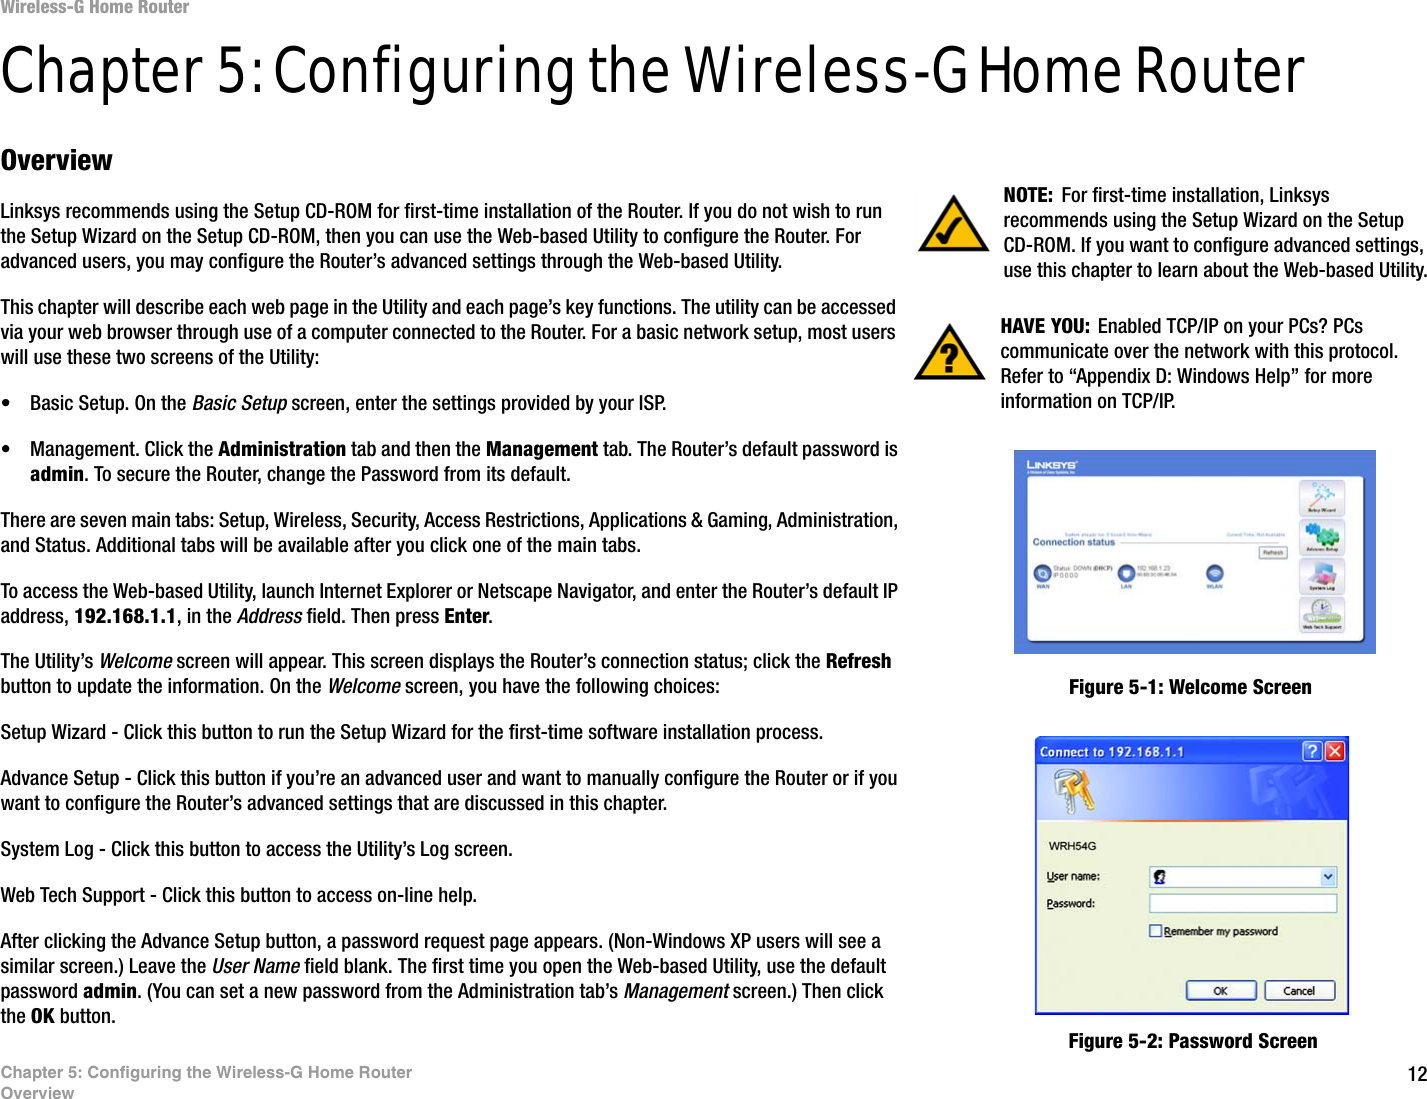 12Chapter 5: Configuring the Wireless-G Home RouterOverviewWireless-G Home RouterChapter 5: Configuring the Wireless-G Home RouterOverviewLinksys recommends using the Setup CD-ROM for first-time installation of the Router. If you do not wish to run the Setup Wizard on the Setup CD-ROM, then you can use the Web-based Utility to configure the Router. For advanced users, you may configure the Router’s advanced settings through the Web-based Utility.This chapter will describe each web page in the Utility and each page’s key functions. The utility can be accessed via your web browser through use of a computer connected to the Router. For a basic network setup, most users will use these two screens of the Utility:• Basic Setup. On the Basic Setup screen, enter the settings provided by your ISP.• Management. Click the Administration tab and then the Management tab. The Router’s default password is admin. To secure the Router, change the Password from its default.There are seven main tabs: Setup, Wireless, Security, Access Restrictions, Applications &amp; Gaming, Administration, and Status. Additional tabs will be available after you click one of the main tabs.To access the Web-based Utility, launch Internet Explorer or Netscape Navigator, and enter the Router’s default IP address, 192.168.1.1, in the Address field. Then press Enter. The Utility’s Welcome screen will appear. This screen displays the Router’s connection status; click the Refresh button to update the information. On the Welcome screen, you have the following choices:Setup Wizard - Click this button to run the Setup Wizard for the first-time software installation process. Advance Setup - Click this button if you’re an advanced user and want to manually configure the Router or if you want to configure the Router’s advanced settings that are discussed in this chapter.System Log - Click this button to access the Utility’s Log screen.Web Tech Support - Click this button to access on-line help.After clicking the Advance Setup button, a password request page appears. (Non-Windows XP users will see a similar screen.) Leave the User Name field blank. The first time you open the Web-based Utility, use the default password admin. (You can set a new password from the Administration tab’s Management screen.) Then click the OK button. HAVE YOU:  Enabled TCP/IP on your PCs? PCs communicate over the network with this protocol. Refer to “Appendix D: Windows Help” for more information on TCP/IP.NOTE: For first-time installation, Linksys recommends using the Setup Wizard on the Setup CD-ROM. If you want to configure advanced settings, use this chapter to learn about the Web-based Utility.Figure 5-1: Welcome ScreenFigure 5-2: Password Screen